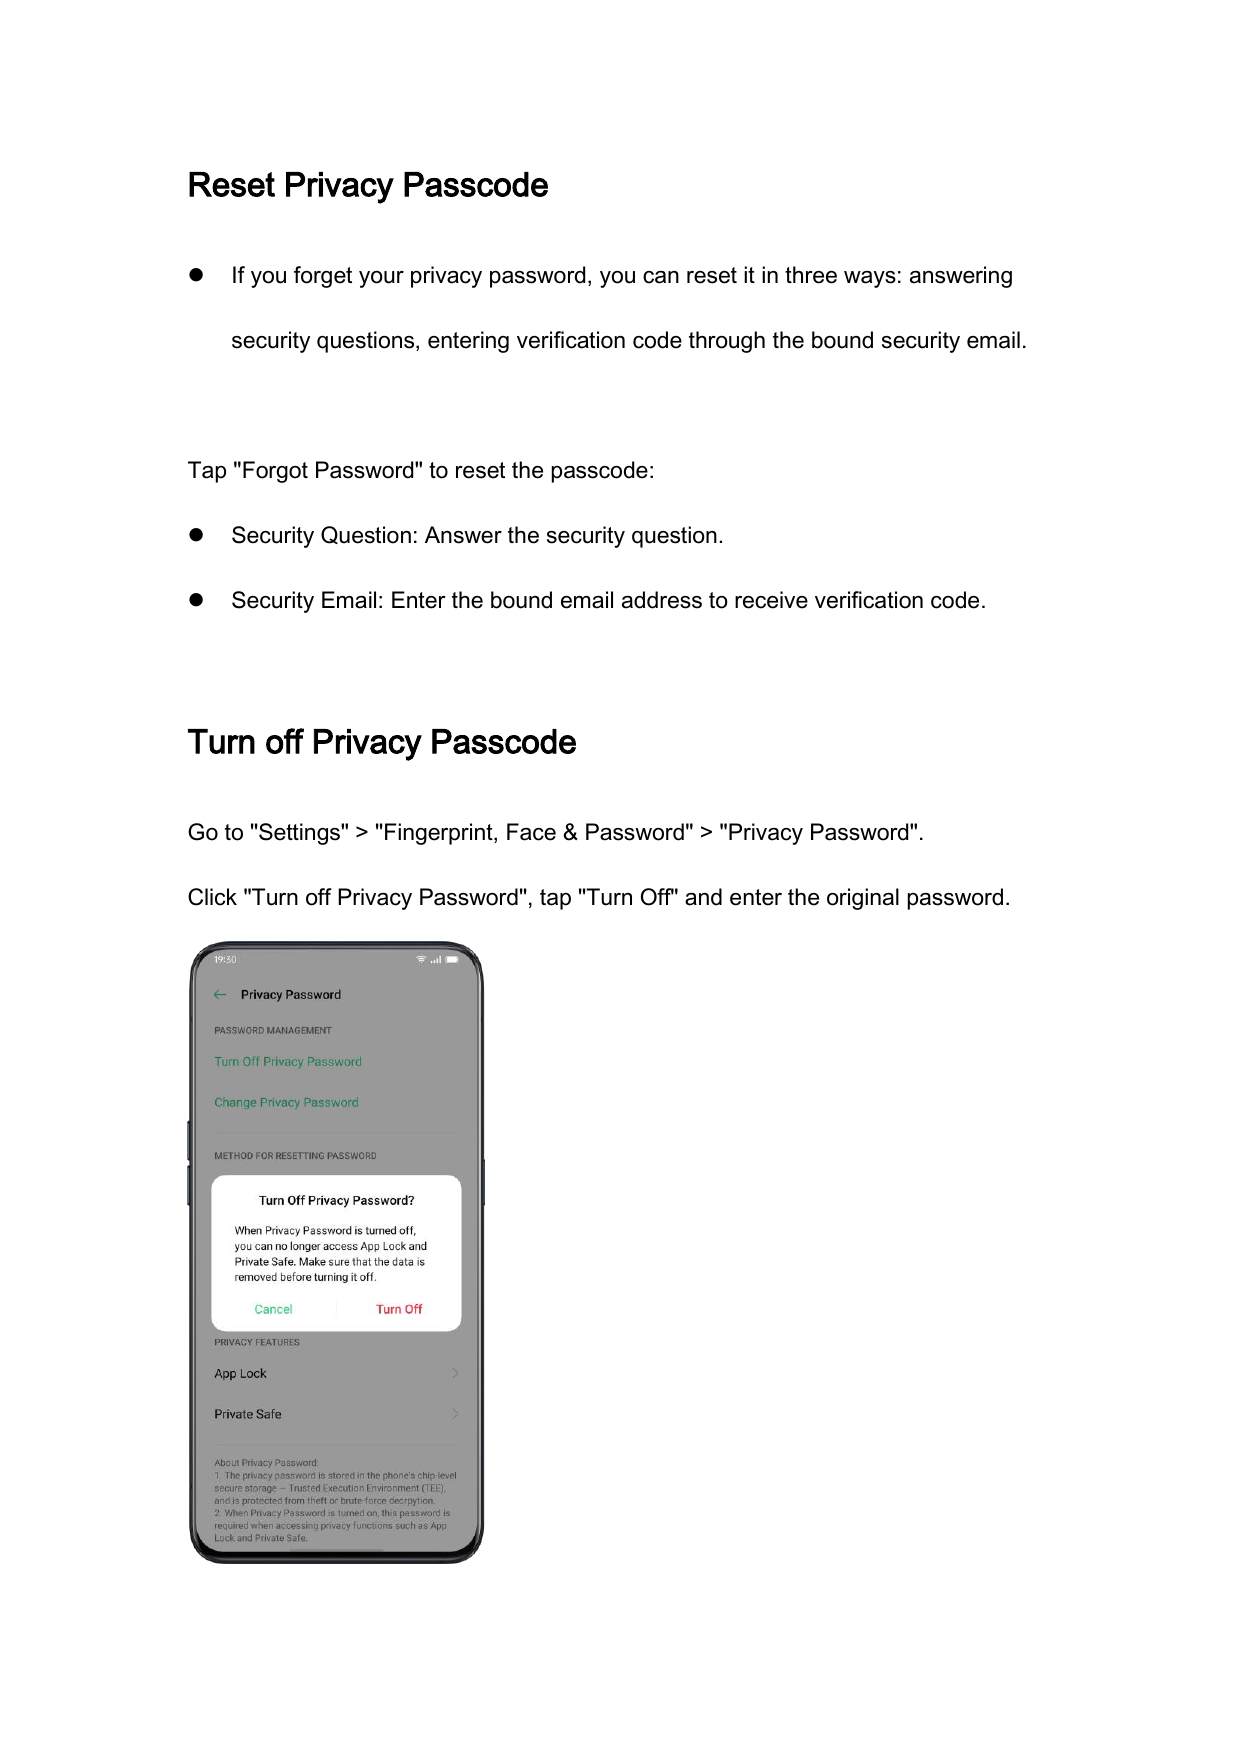 Reset Privacy PasscodeIf you forget your privacy password, you can reset it in three ways: answeringsecurity questions, enterin